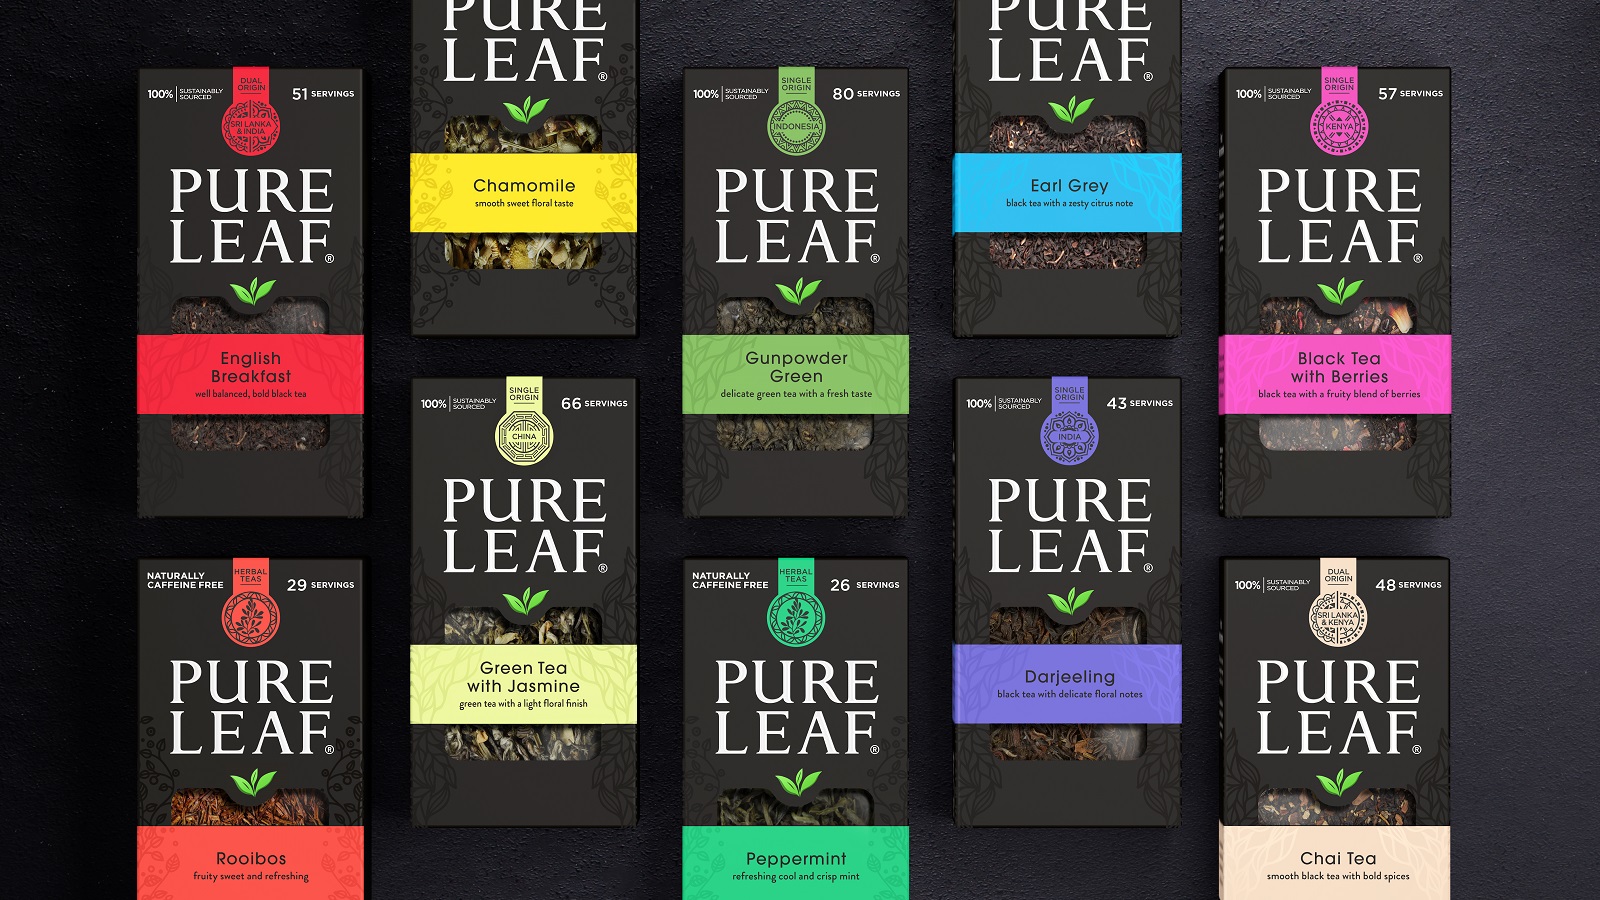 Pure Leaf Shrouds Itself in Black to Express Luxury